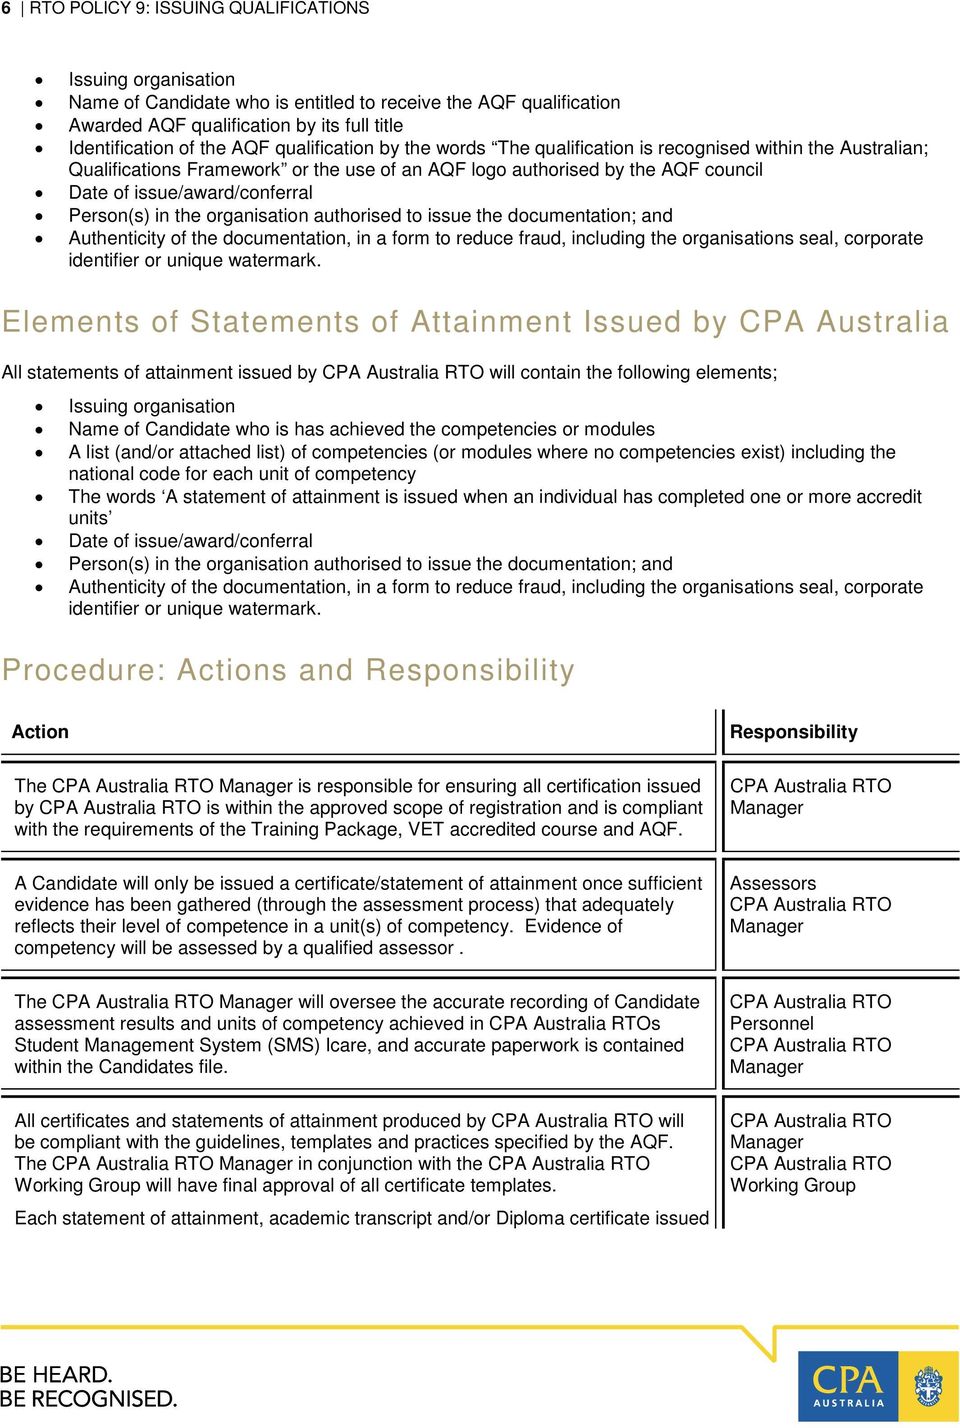 Person(s) in the organisation authorised to issue the documentation; and Authenticity of the documentation, in a form to reduce fraud, including the organisations seal, corporate identifier or unique